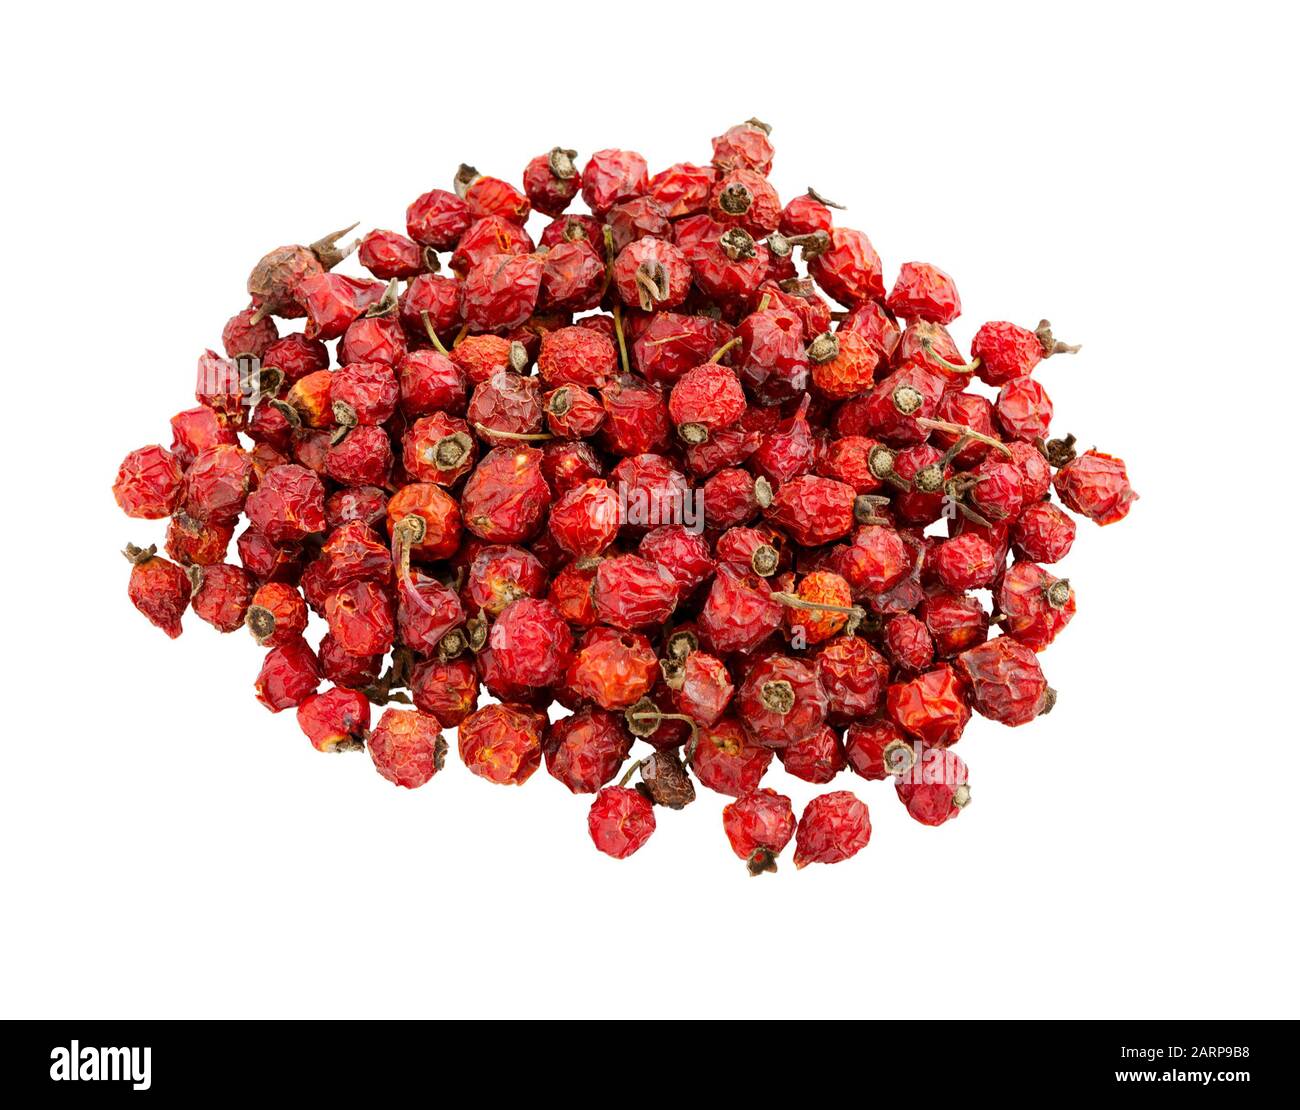 Dry berry Rose hips isolated on a white background. Natural herbal medicine, medicinal herbs. Pile of dogrose. Red dry fruits. Healthy food. Stock Photo